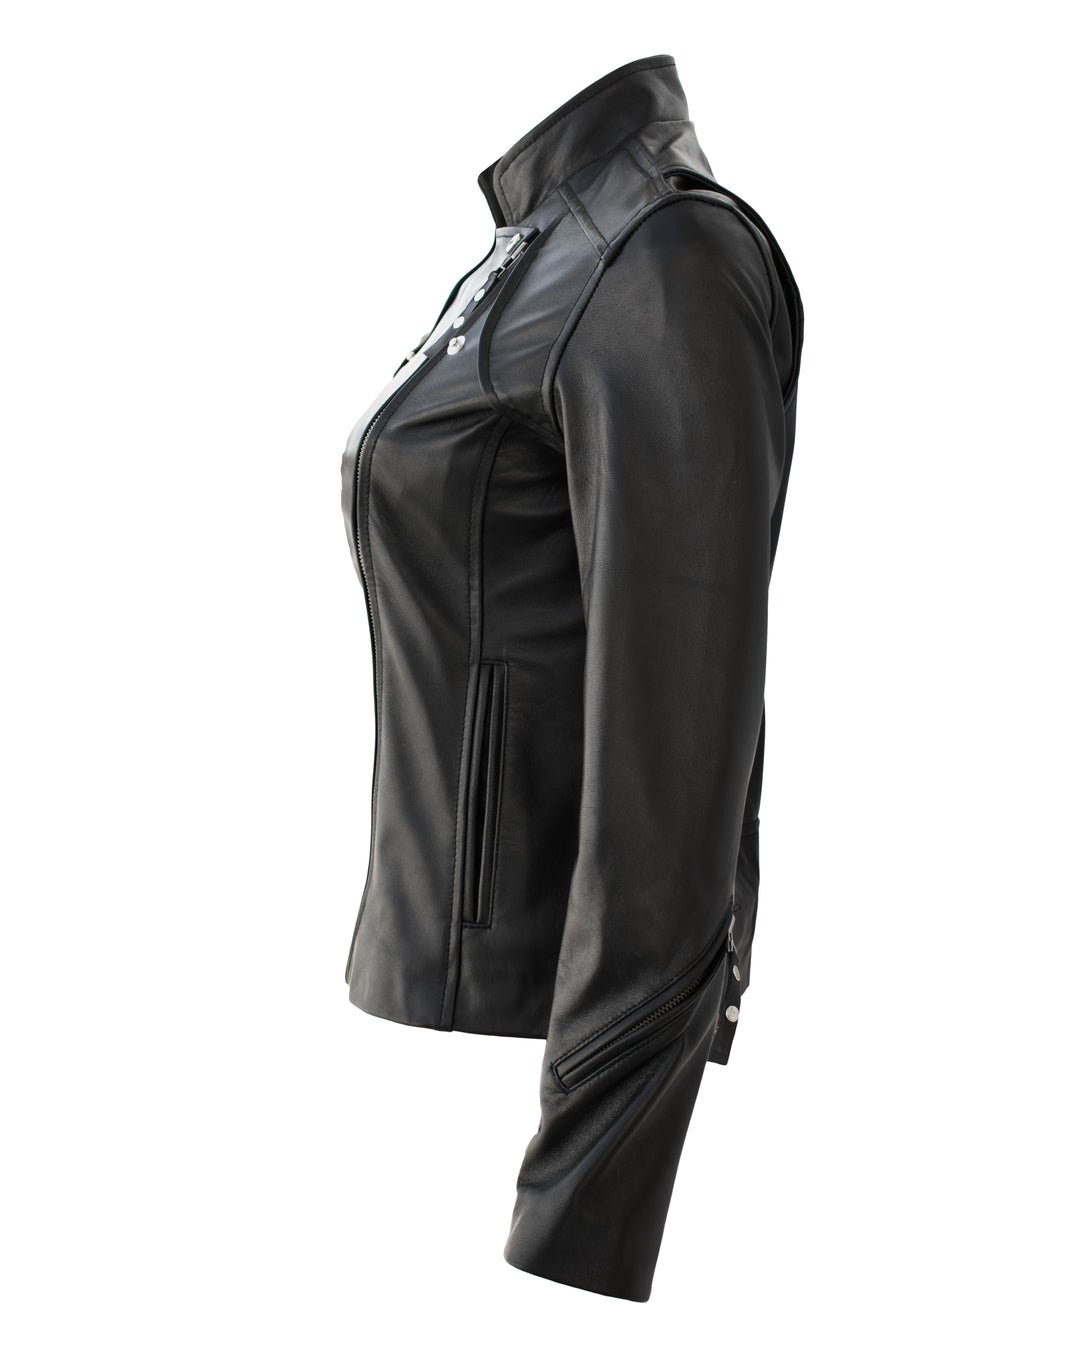 Shop Leather Jacket For Women